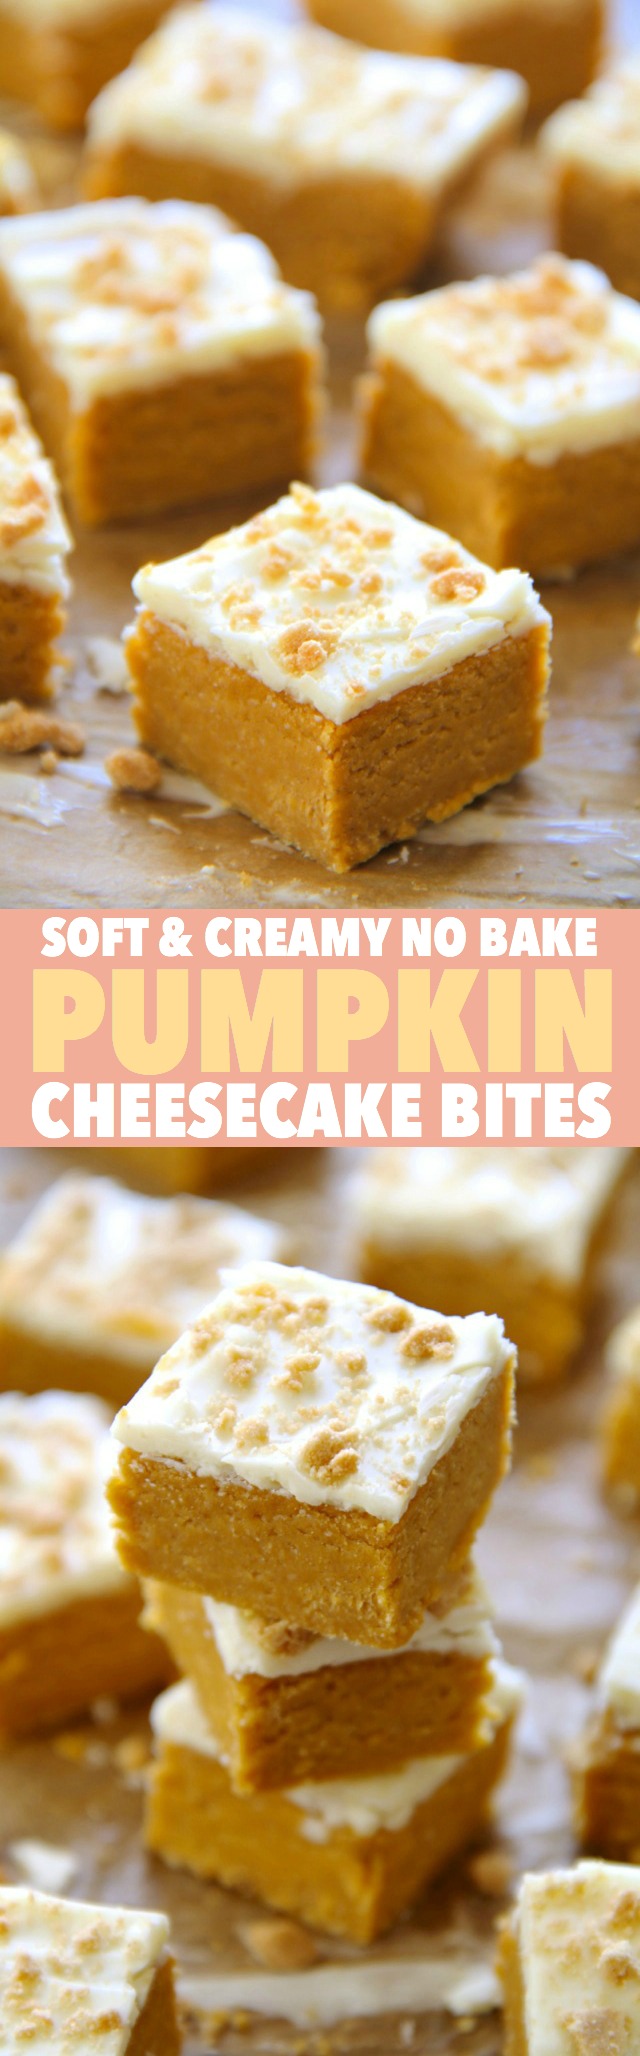 These soft and creamy No Bake Pumpkin Cheesecake Bites combine the tanginess of cheesecake with the spicy sweetness of pumpkin pie. Easily made gluten-free or vegan depending on your dietary needs, they're an irresistible fall treat that everyone will love! || runnningwithspoons.com #pumpkin #cheesecake #nobake